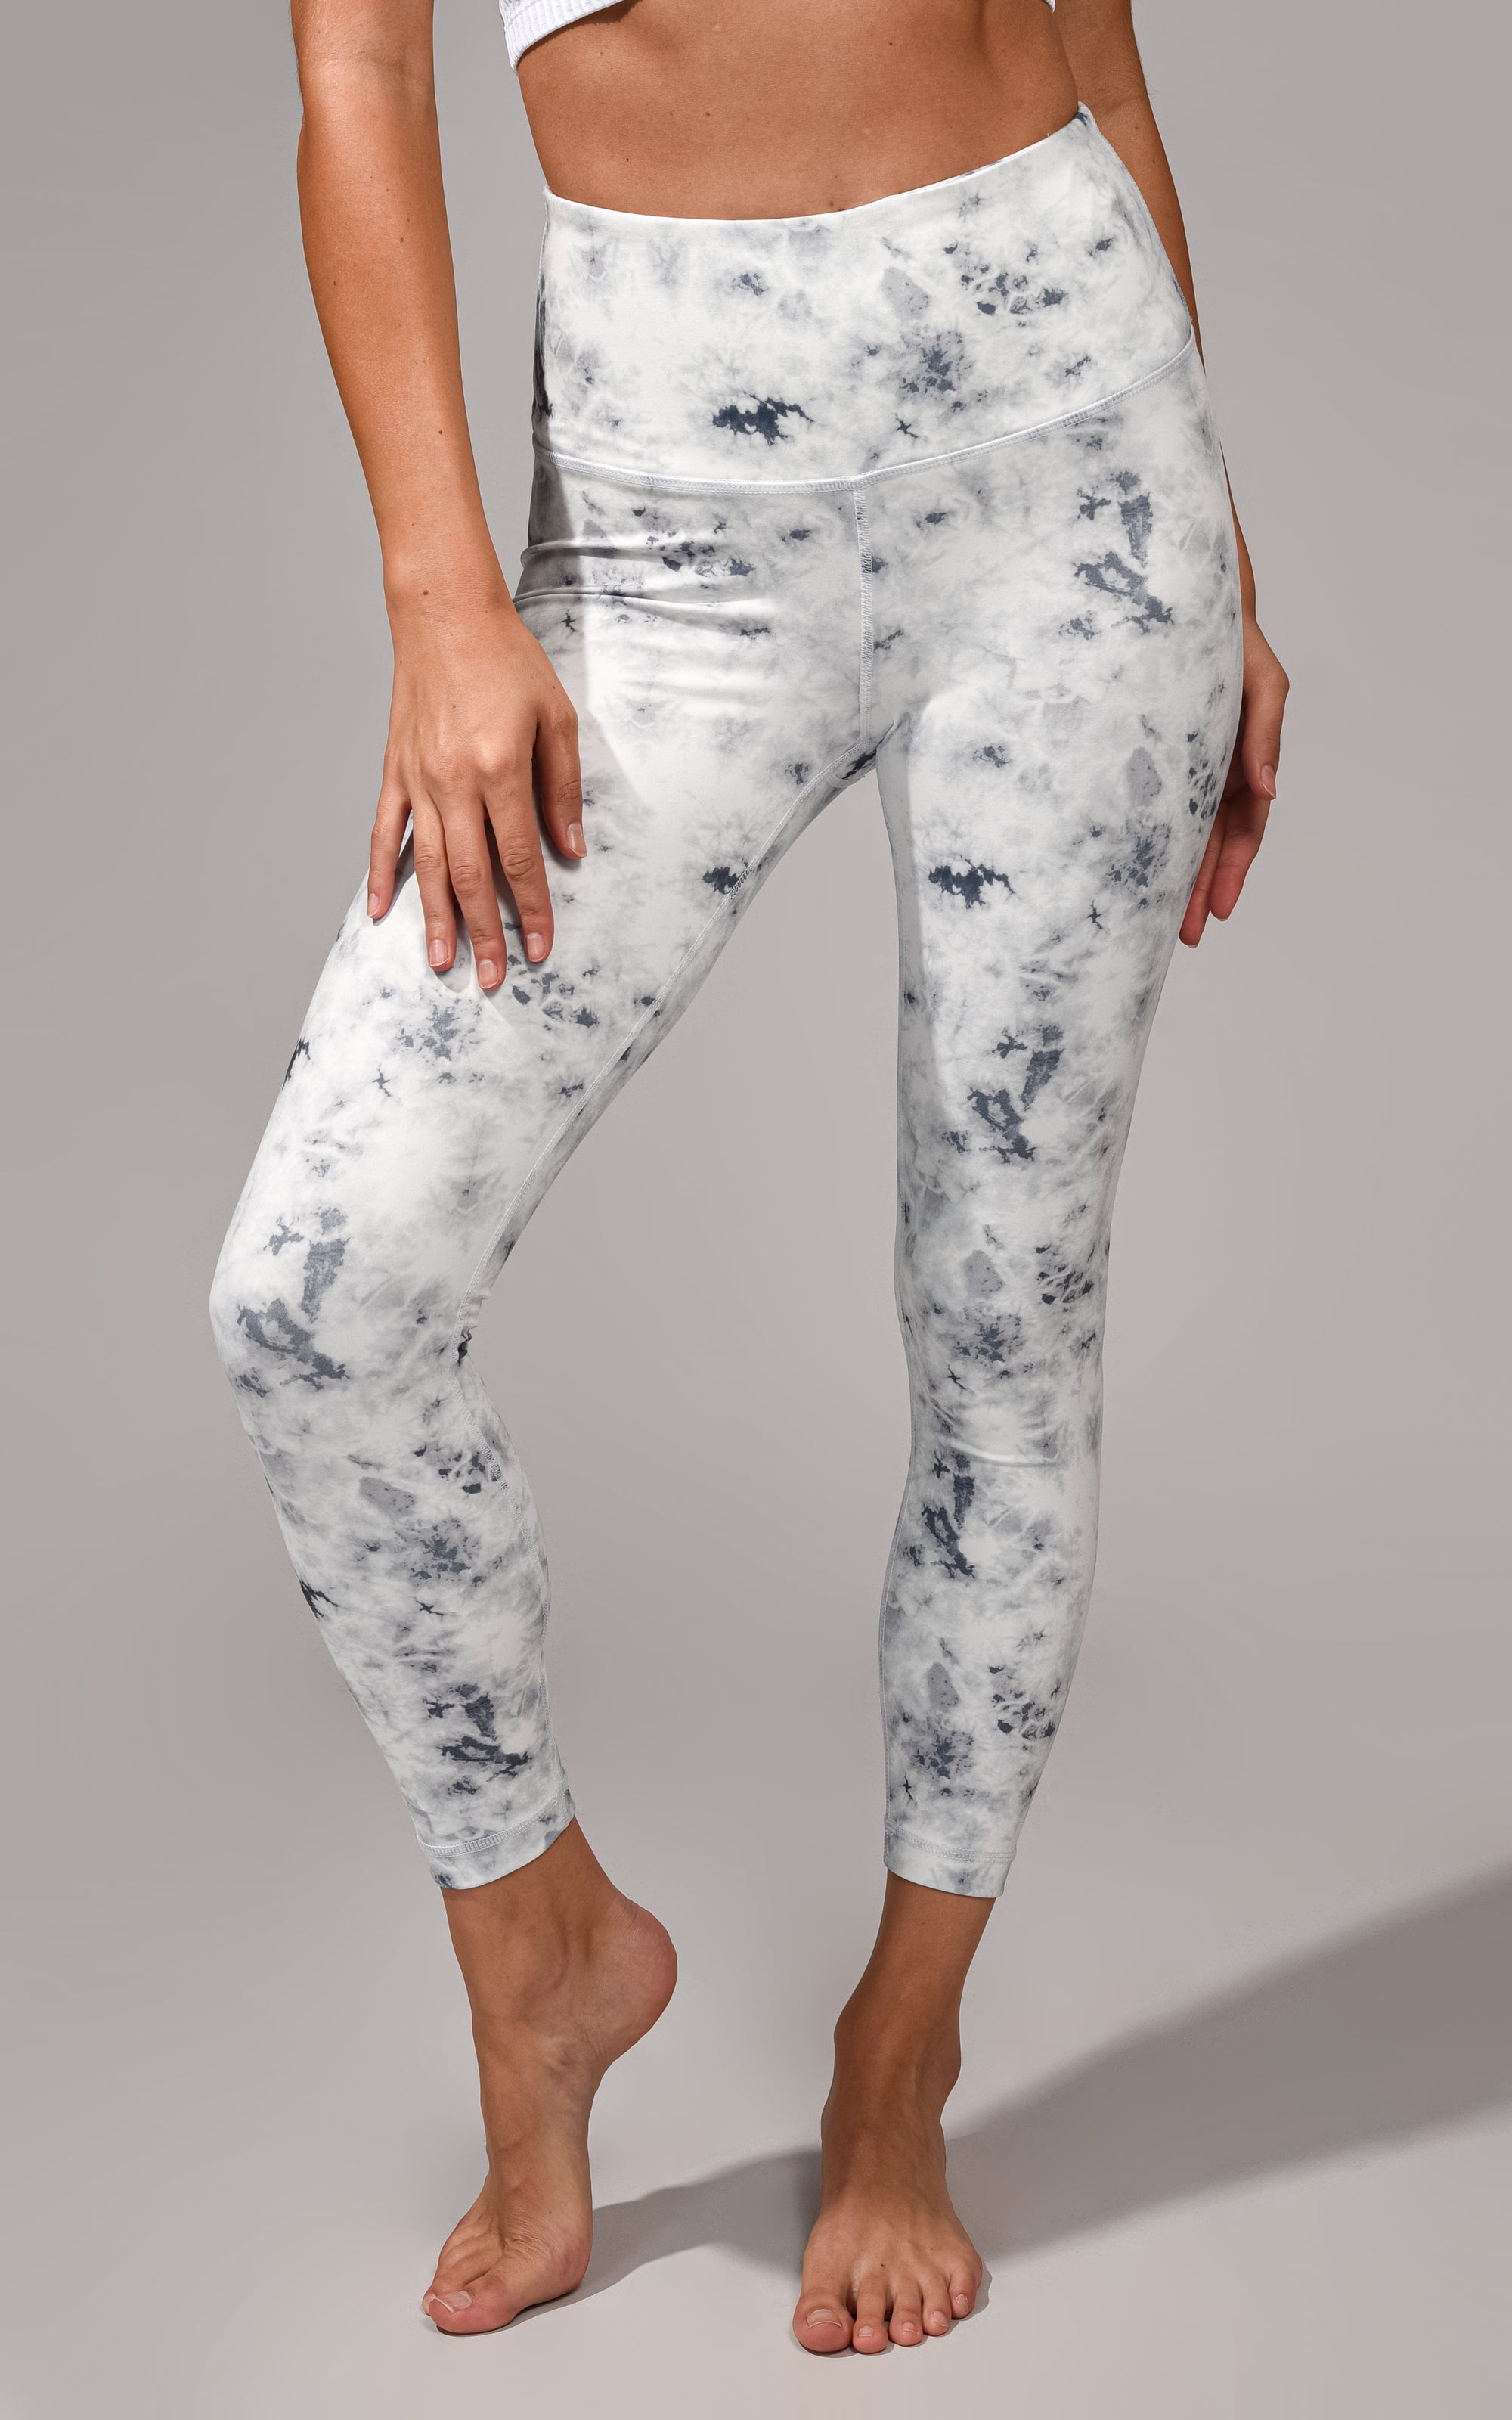 Yogalicious Lux Grey Camo Leggings Womens Size XS Grey and White Yoga Pants